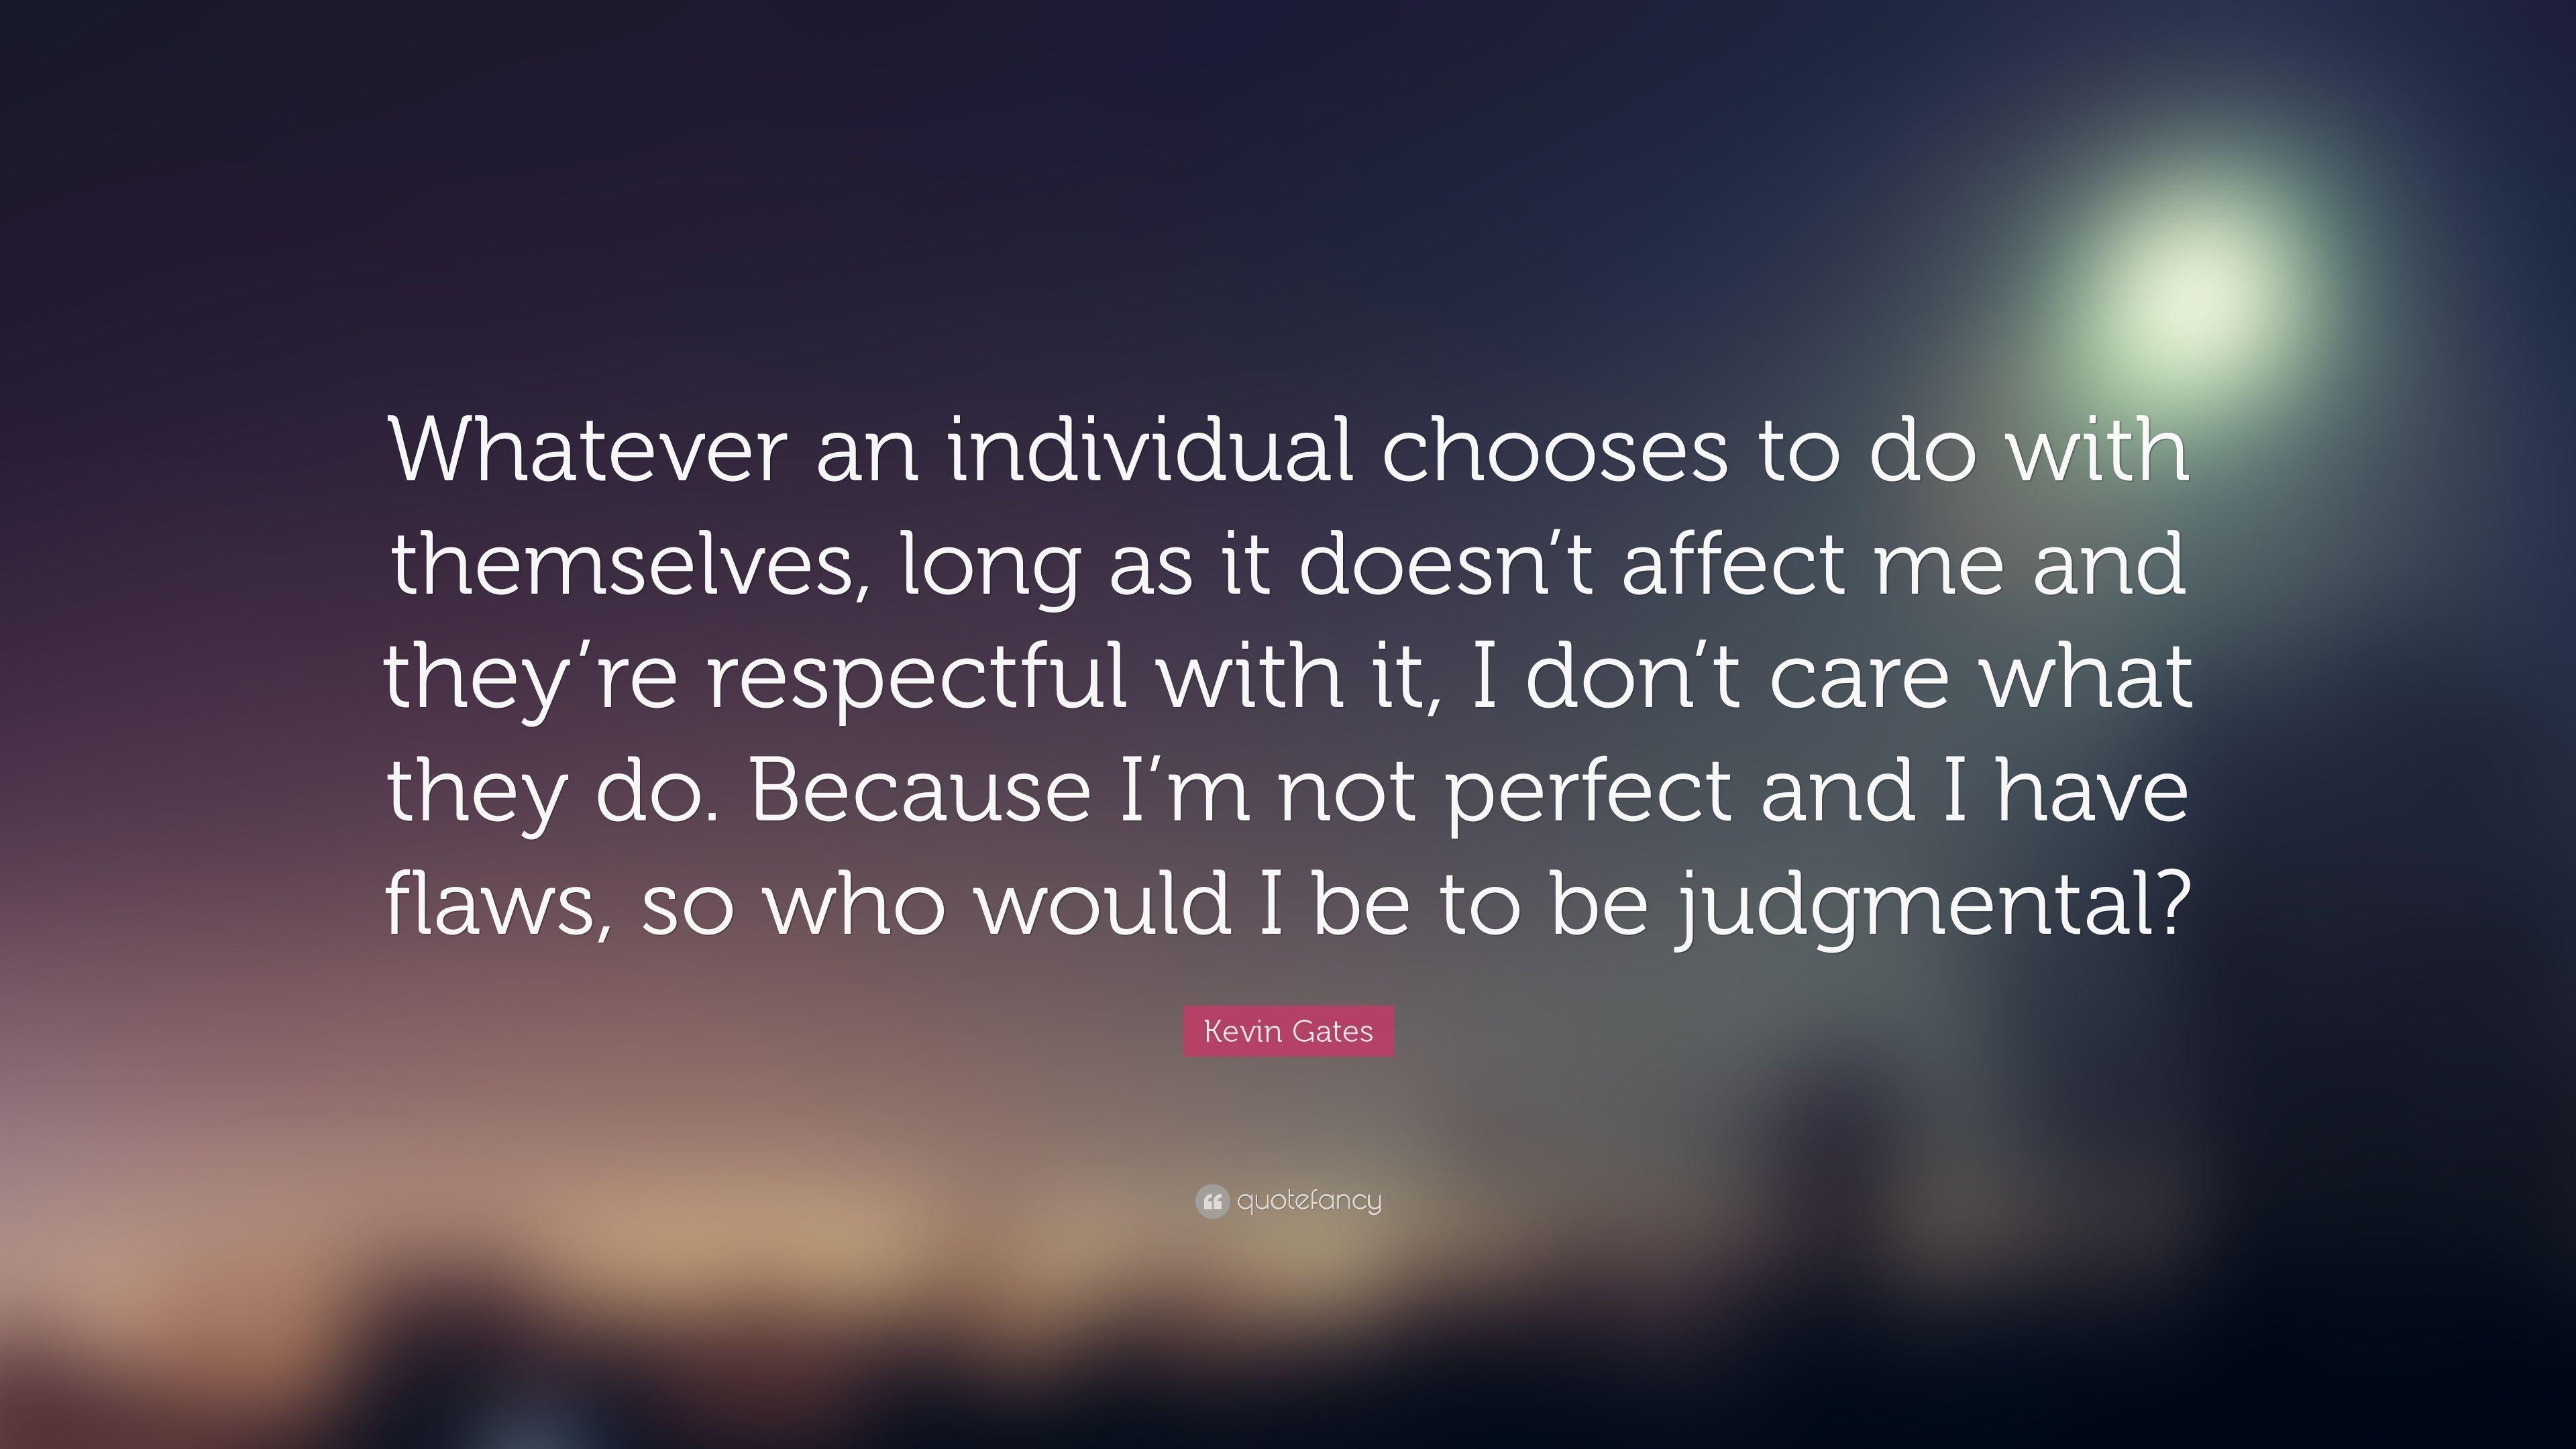 Kevin Gates Quote: "Whatever an individual chooses to do with.